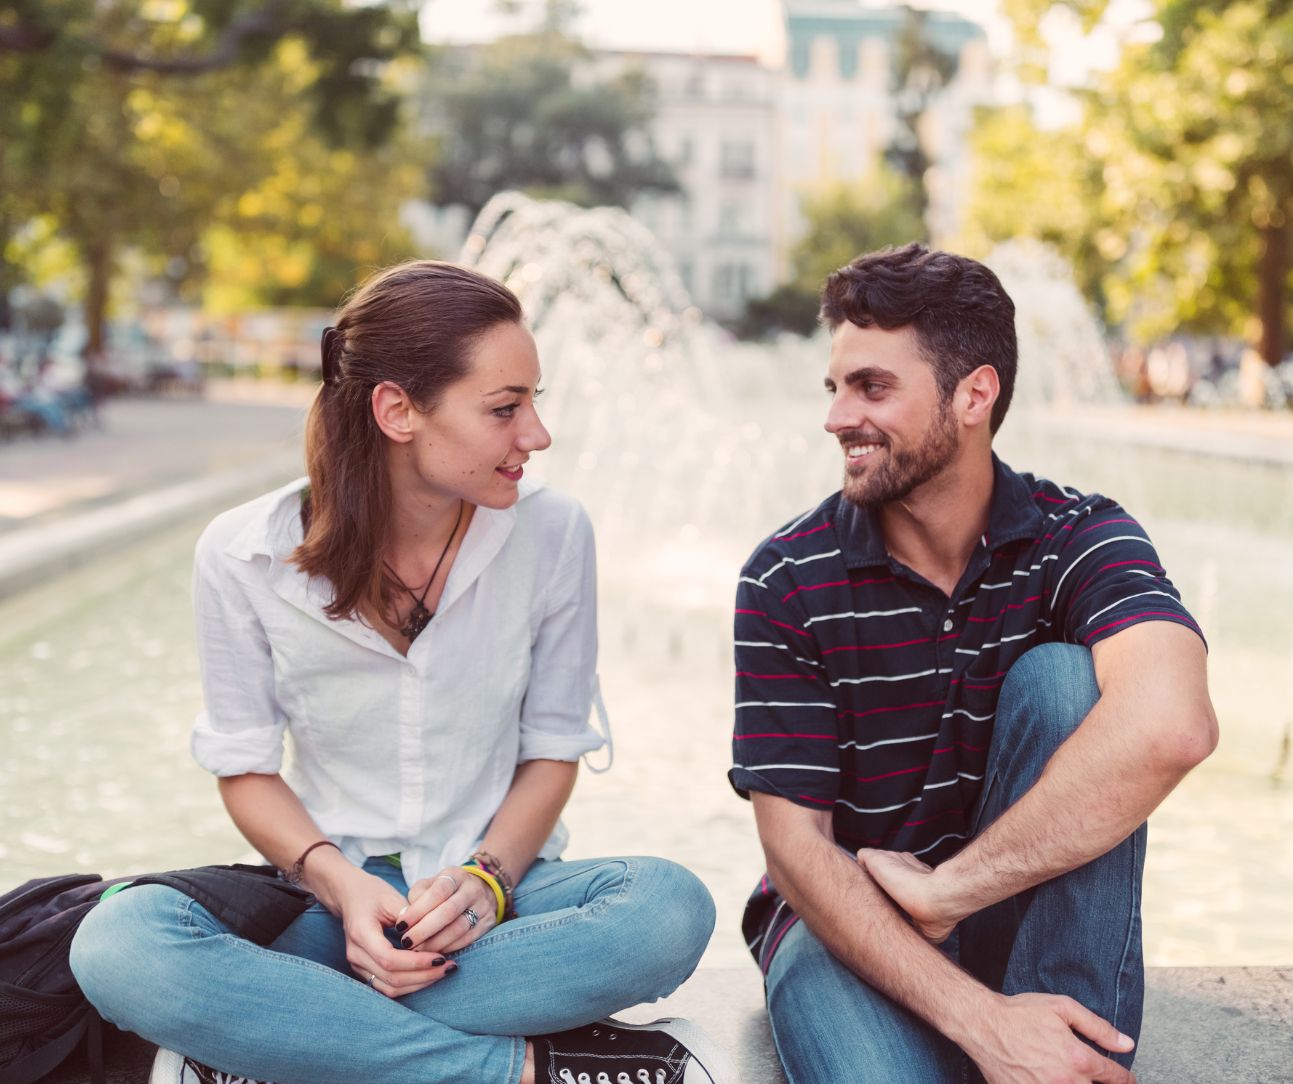 two people sitting by a fountain on date, discussing